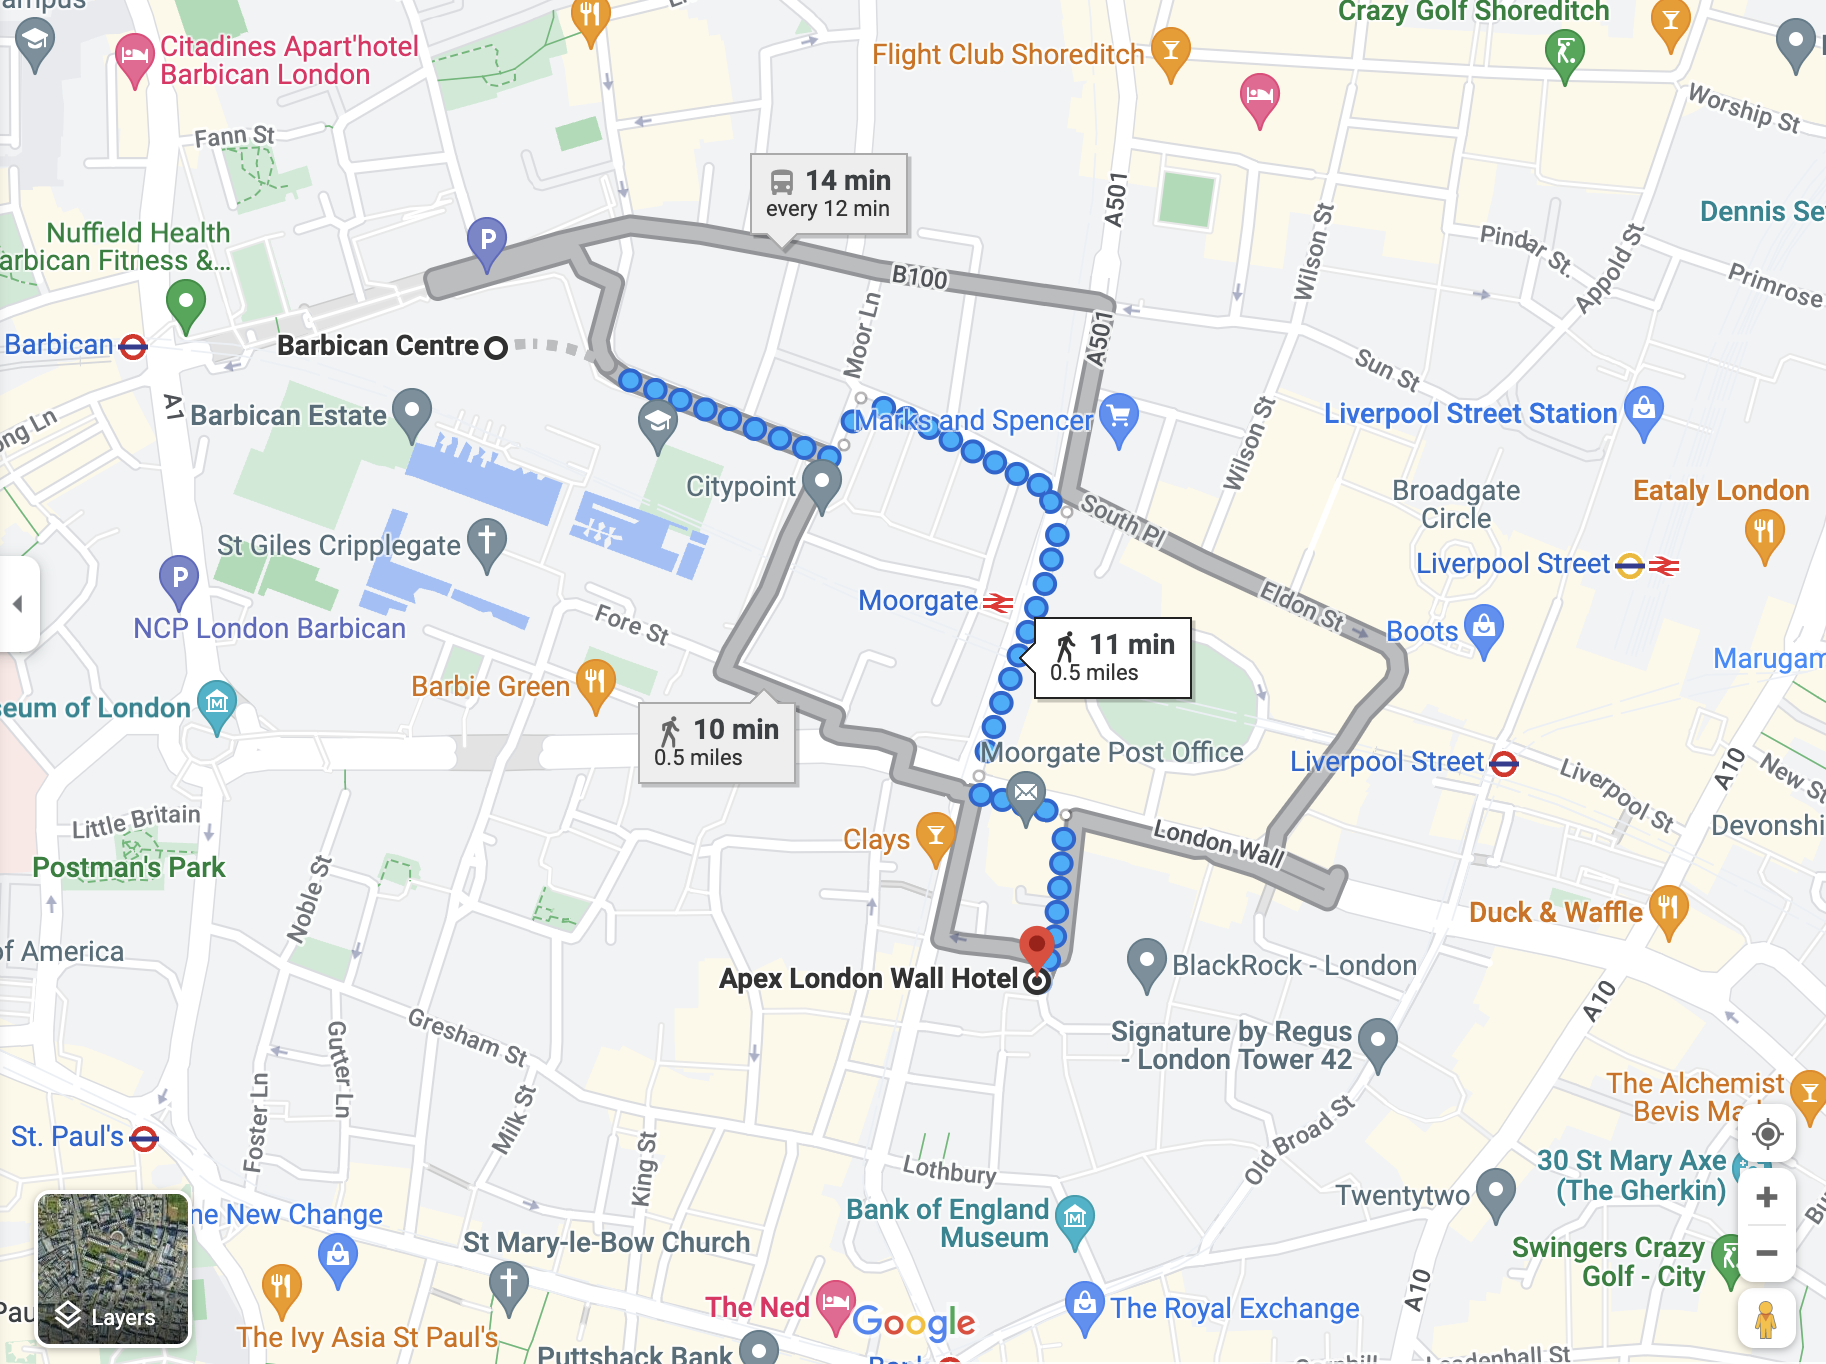 Google maps directions from Barbican Centre to Apex London Wall Hotel